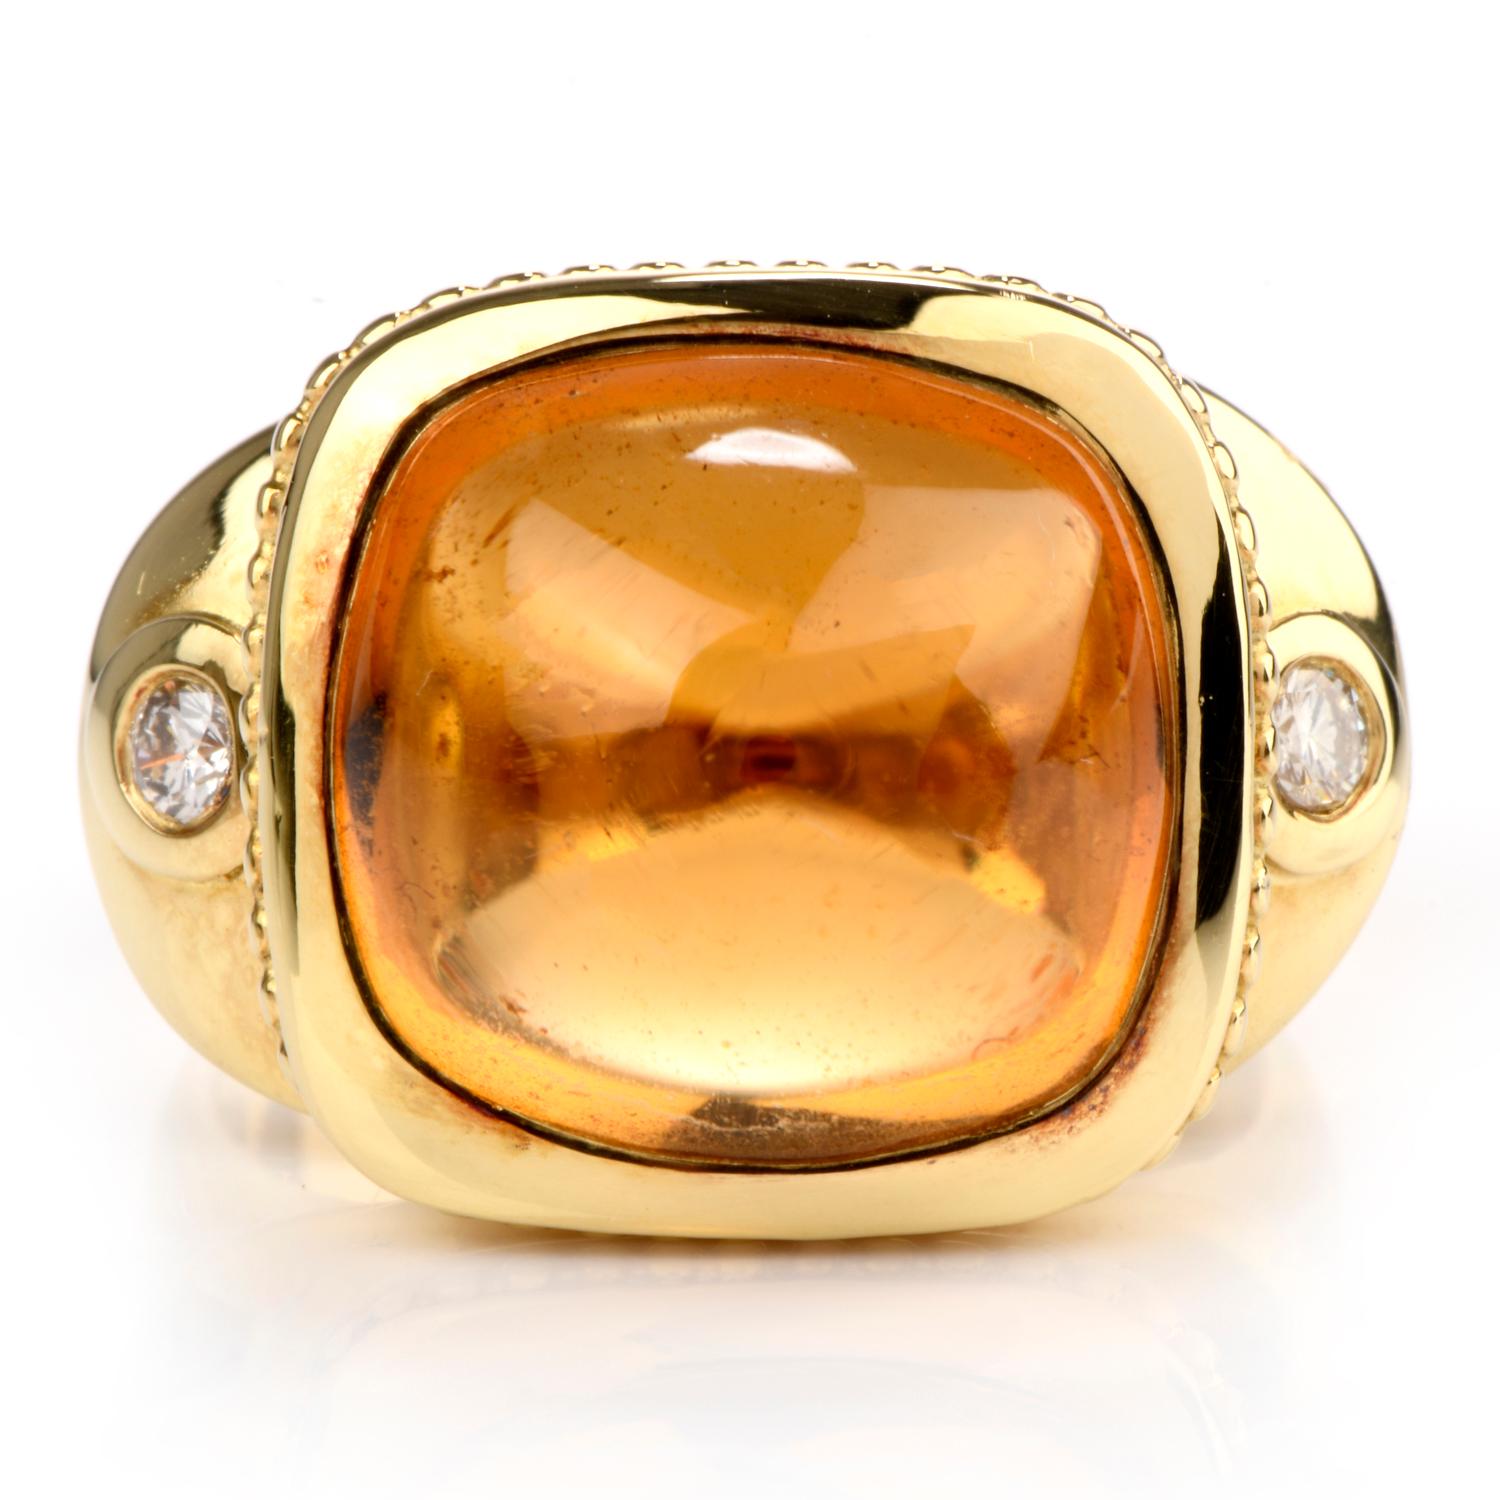 A bold statement is made with this DIamond and Citrine

cocktail ring crafted in 18K yellow gold.

Adorning the center is one large cabachon cut Citrine measuring

appx. 13.90 x 1305 x 8.88mm high and weighing appx. 14.53 carats.

Flanked on either